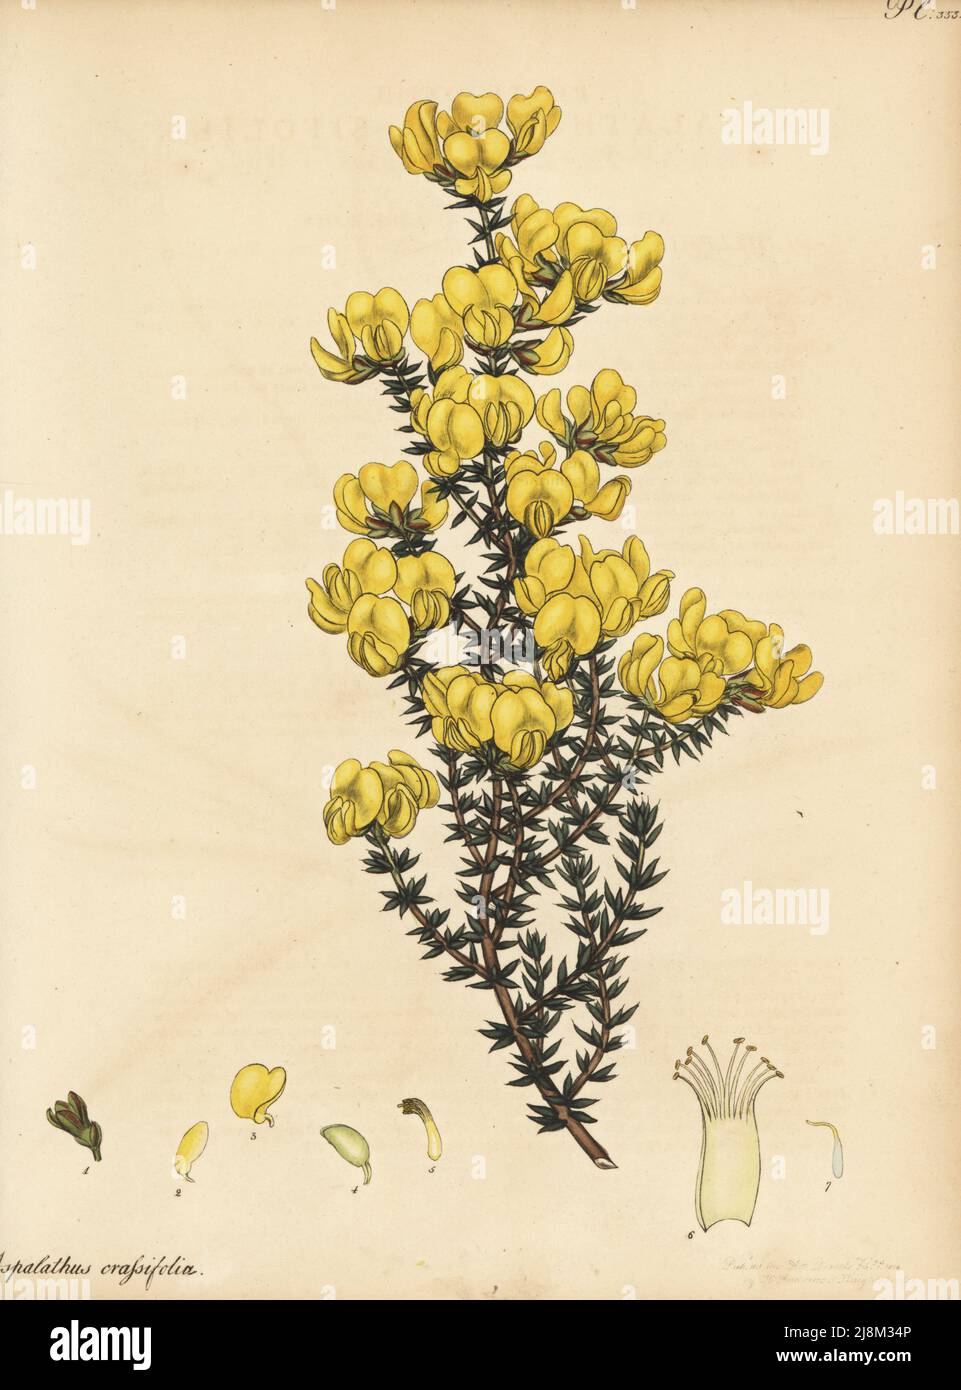 Cape gorse or thick-leaved aspalathus, Aspalathus crassifolius. From the Cape of Good Hope, South Africa. In George Hibbert's herbarium. Copperplate engraving drawn, engraved and hand-coloured by Henry Andrews from his Botanical Register, Volume 5, self-published in Knightsbridge, London, 1804. Stock Photo